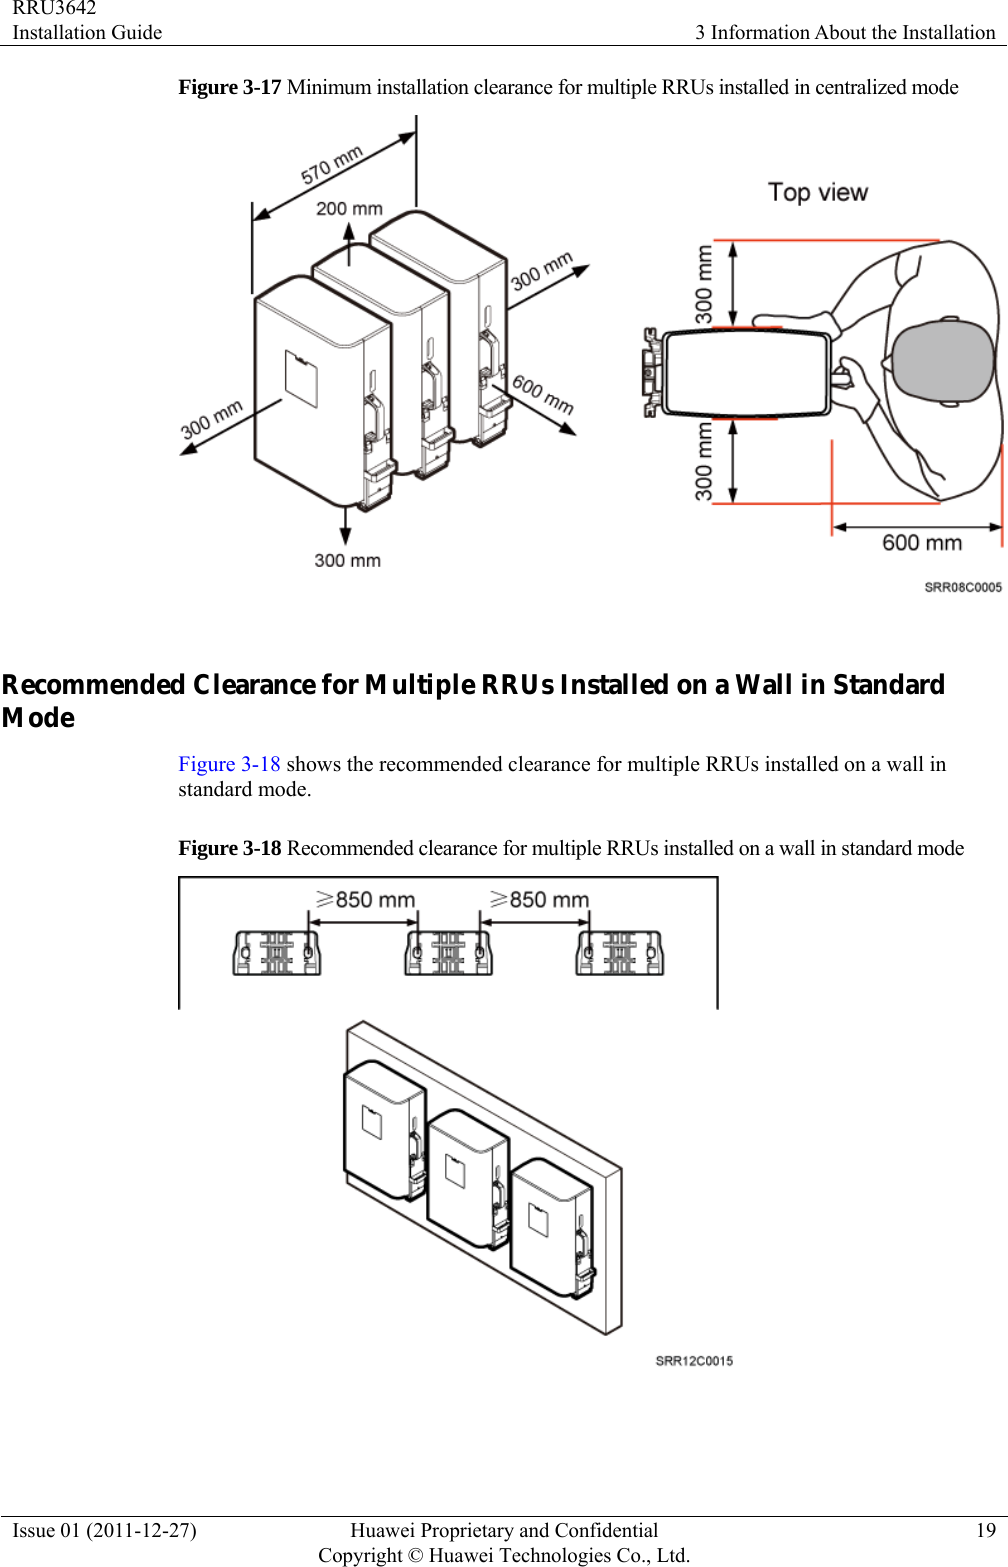 RRU3642 Installation Guide  3 Information About the Installation Issue 01 (2011-12-27)  Huawei Proprietary and Confidential         Copyright © Huawei Technologies Co., Ltd.19 Figure 3-17 Minimum installation clearance for multiple RRUs installed in centralized mode   Recommended Clearance for Multiple RRUs Installed on a Wall in Standard Mode Figure 3-18 shows the recommended clearance for multiple RRUs installed on a wall in standard mode. Figure 3-18 Recommended clearance for multiple RRUs installed on a wall in standard mode   